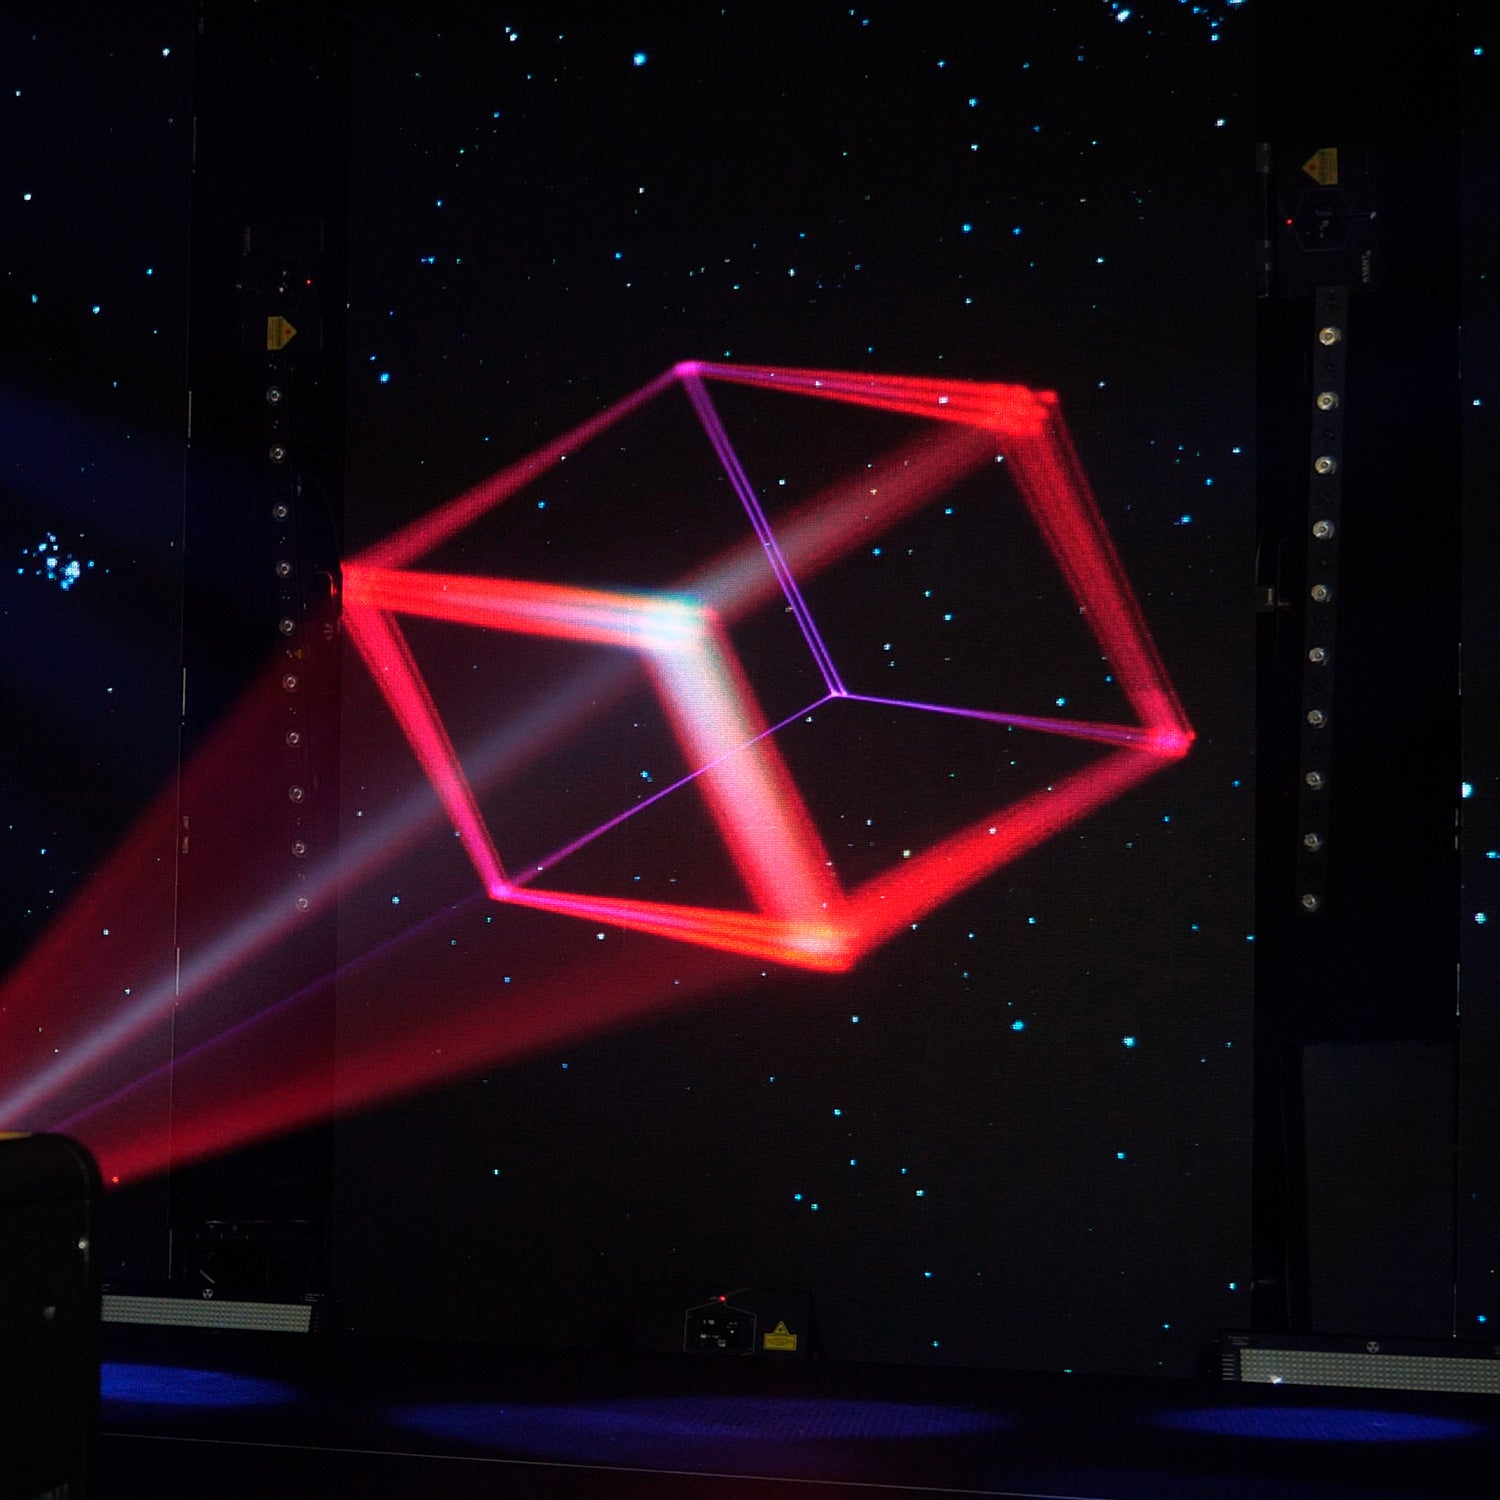 3D laser projector is bit of a myth